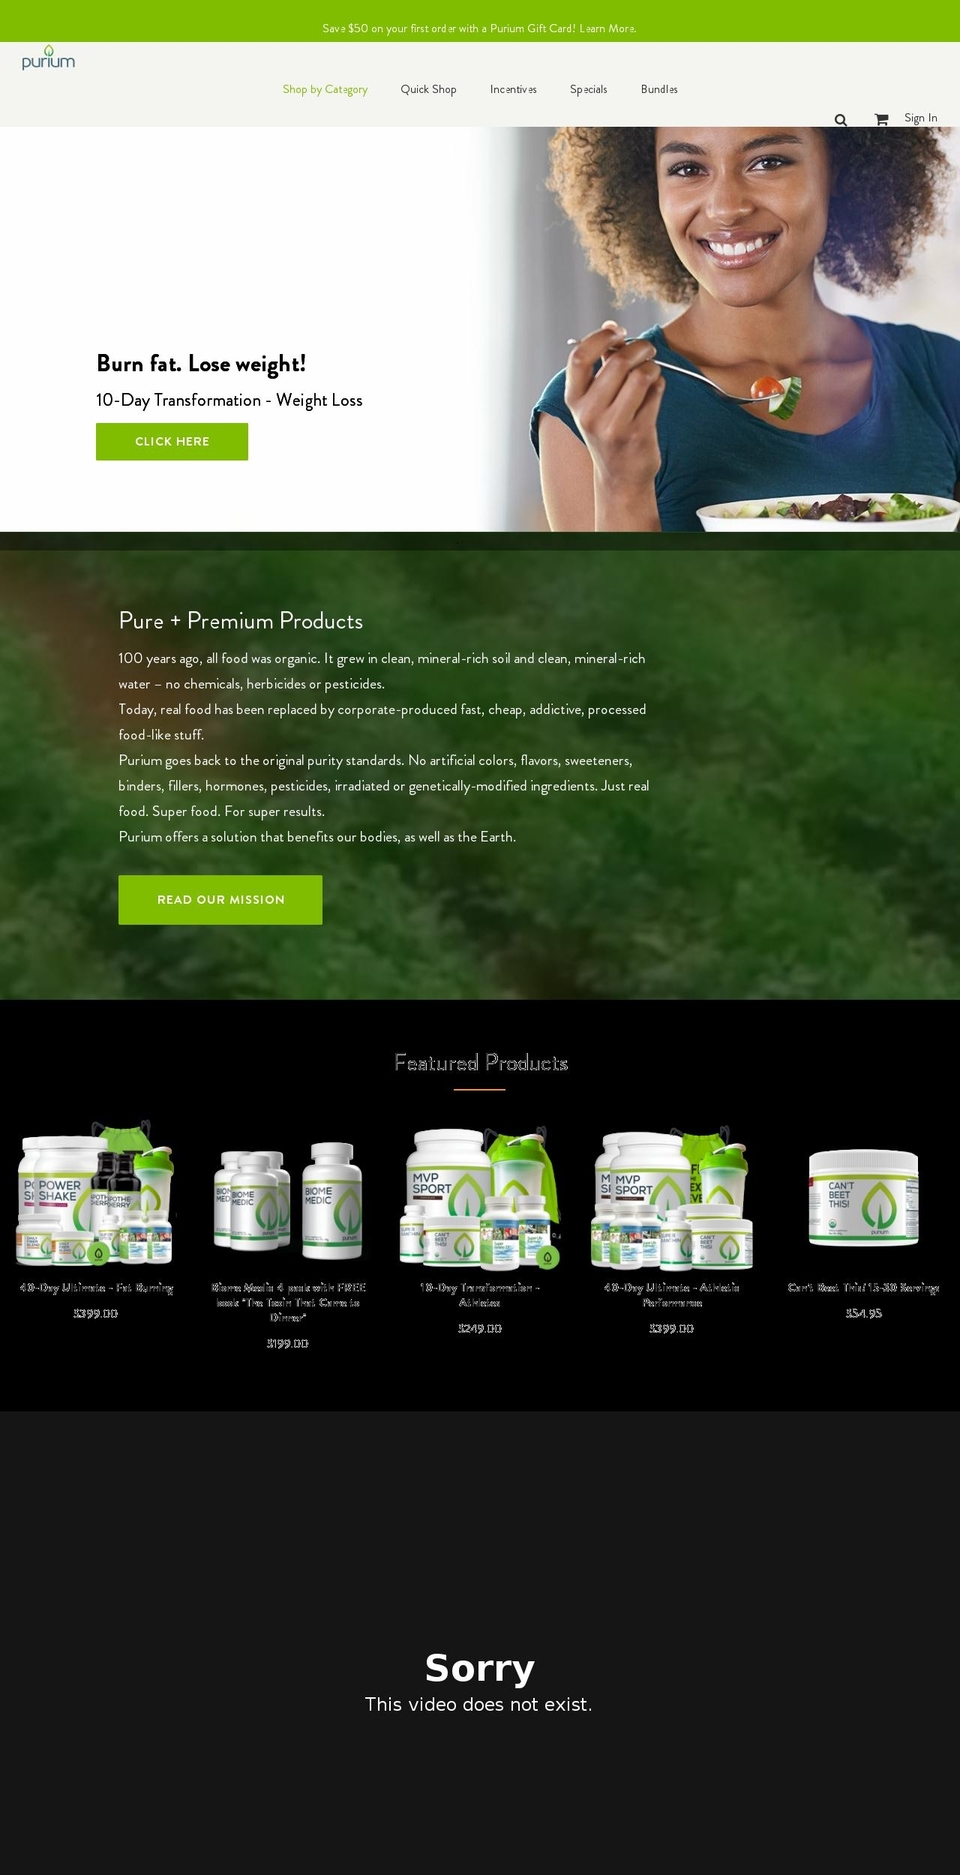 Production | BVA Shopify theme site example platinumhealthproducts.com